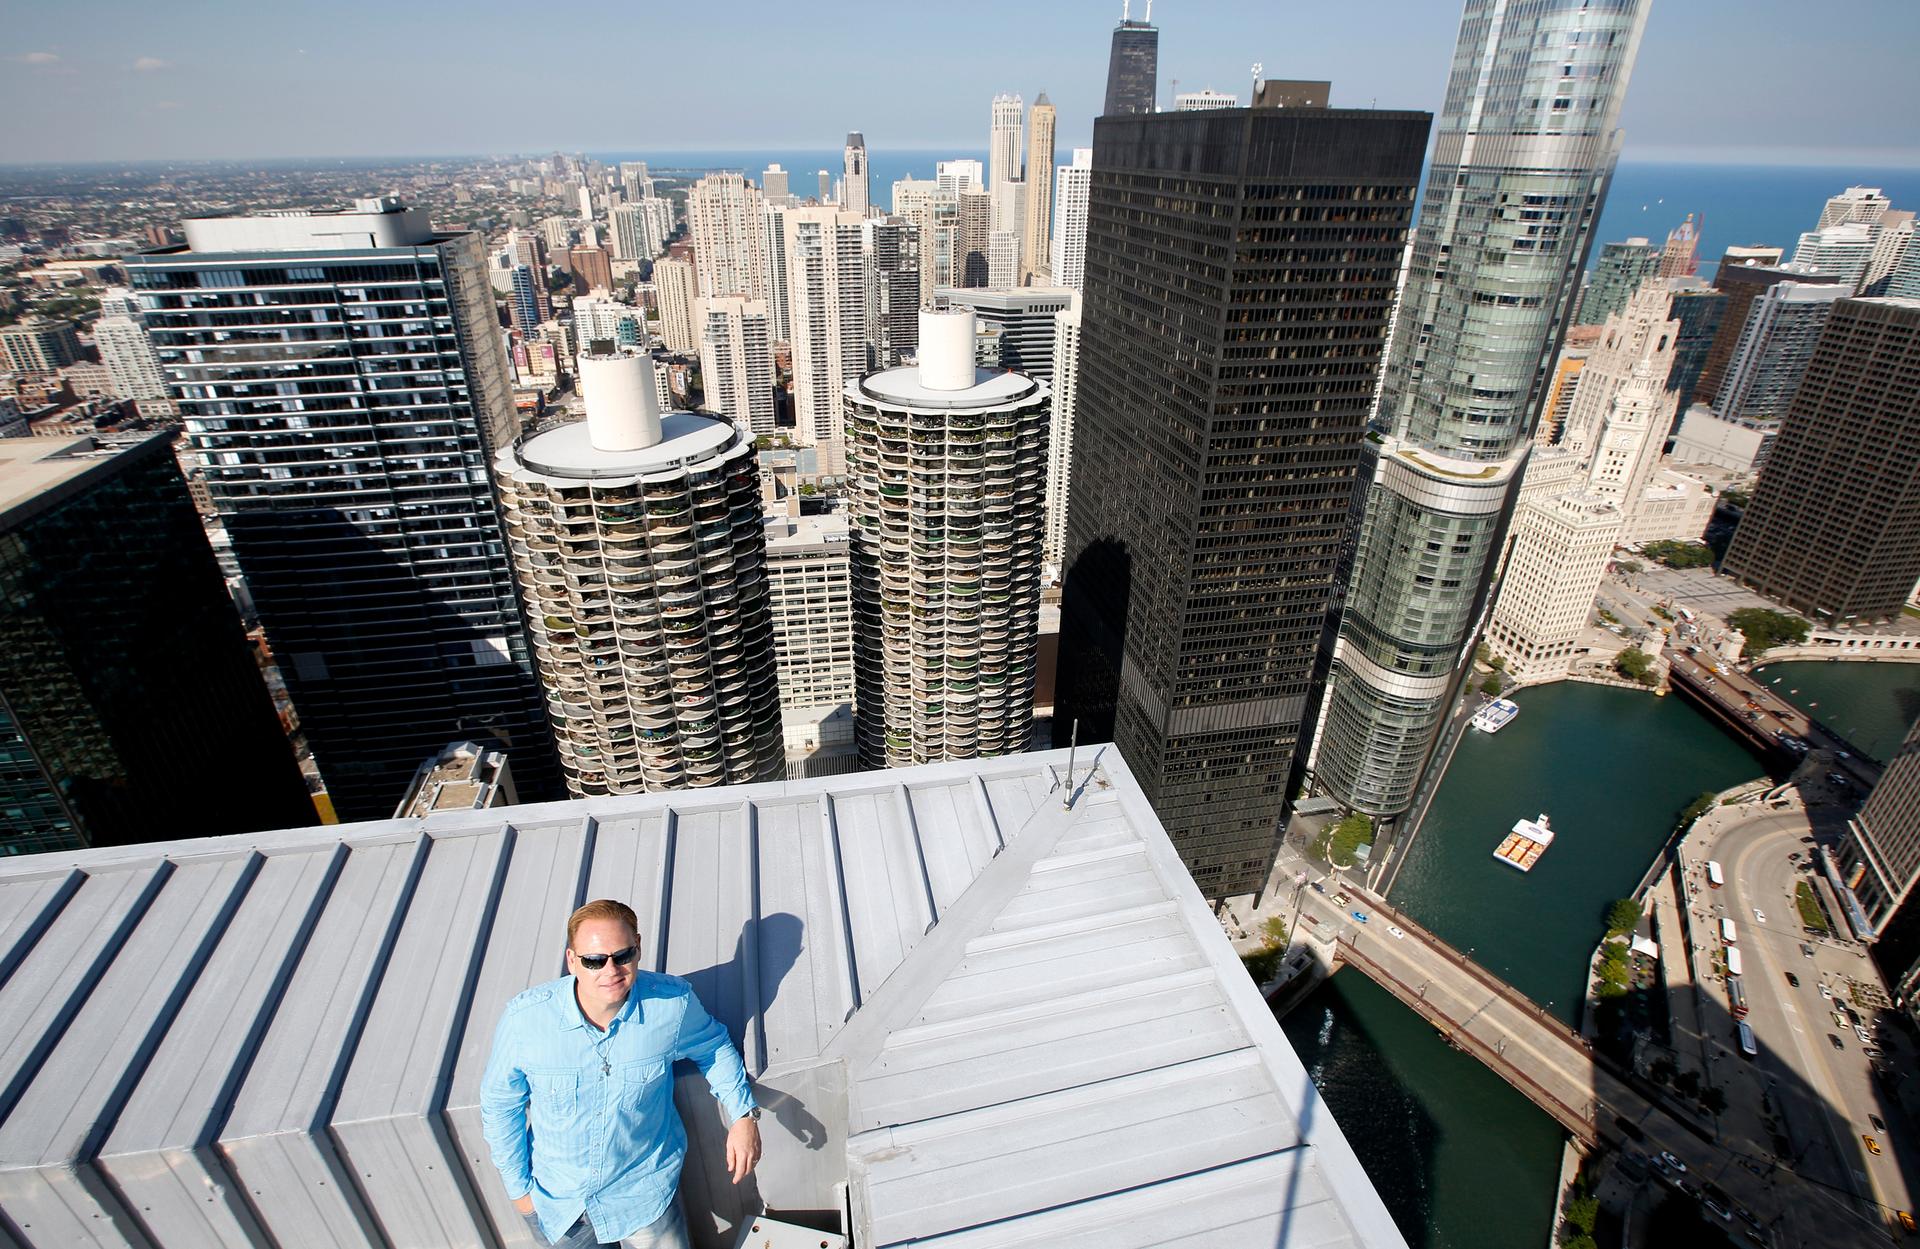 Daredevil Nik Wallenda poses for a photo on the rooftop of the Leo Burnett Building in Chicago on September 17, 2014.